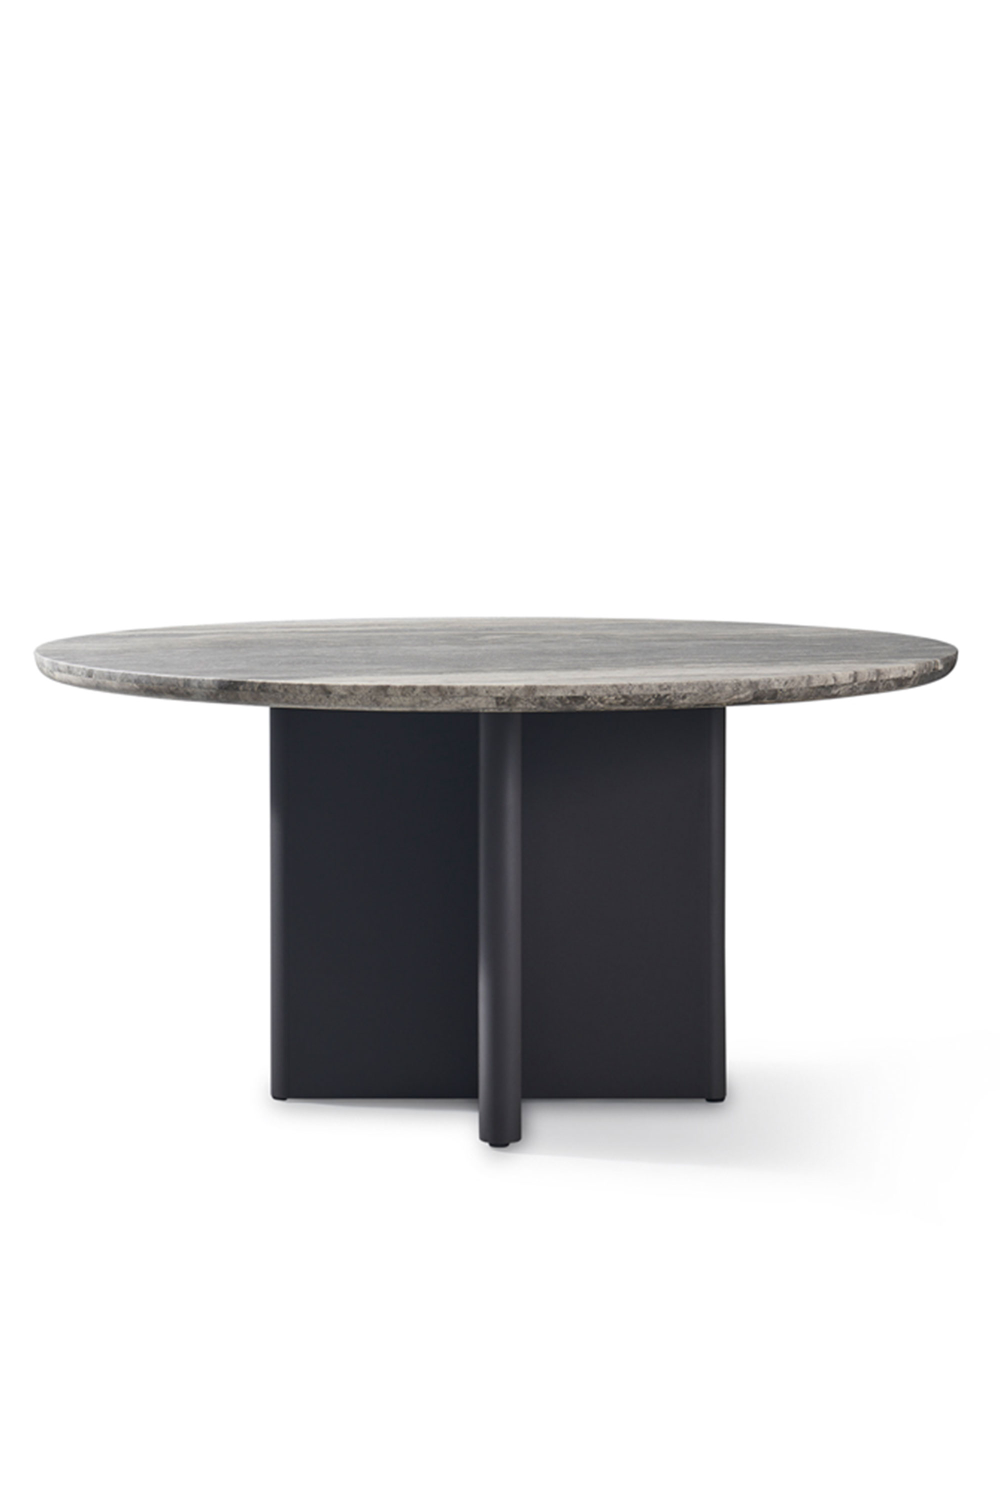 Round Travertine Outdoor Dining Table | Andrew Martin Caicos | OROA